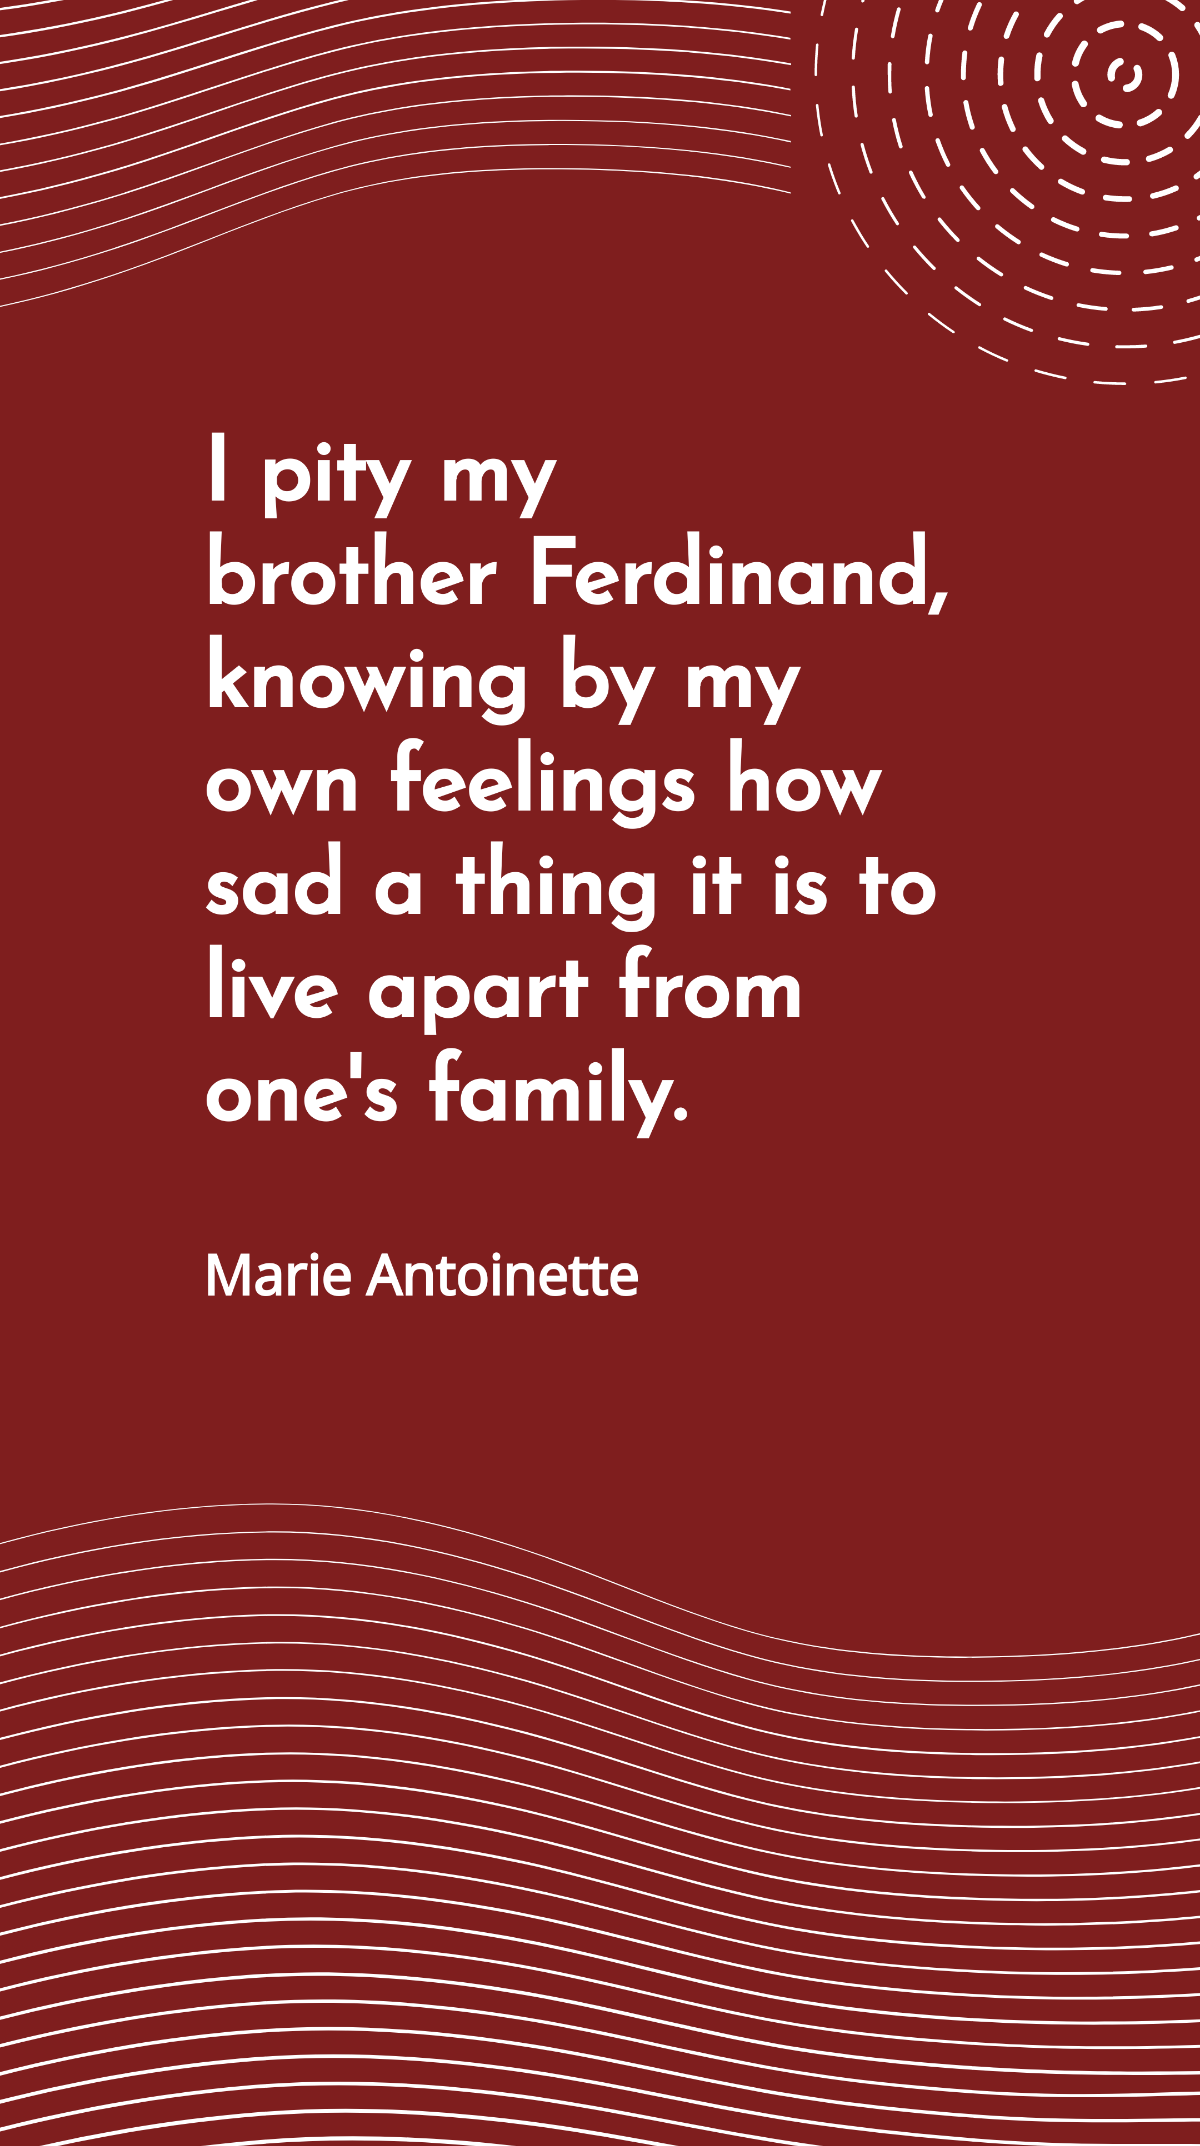 Marie Antoinette - I pity my brother Ferdinand, knowing by my own feelings how sad a thing it is to live apart from one's family. Template